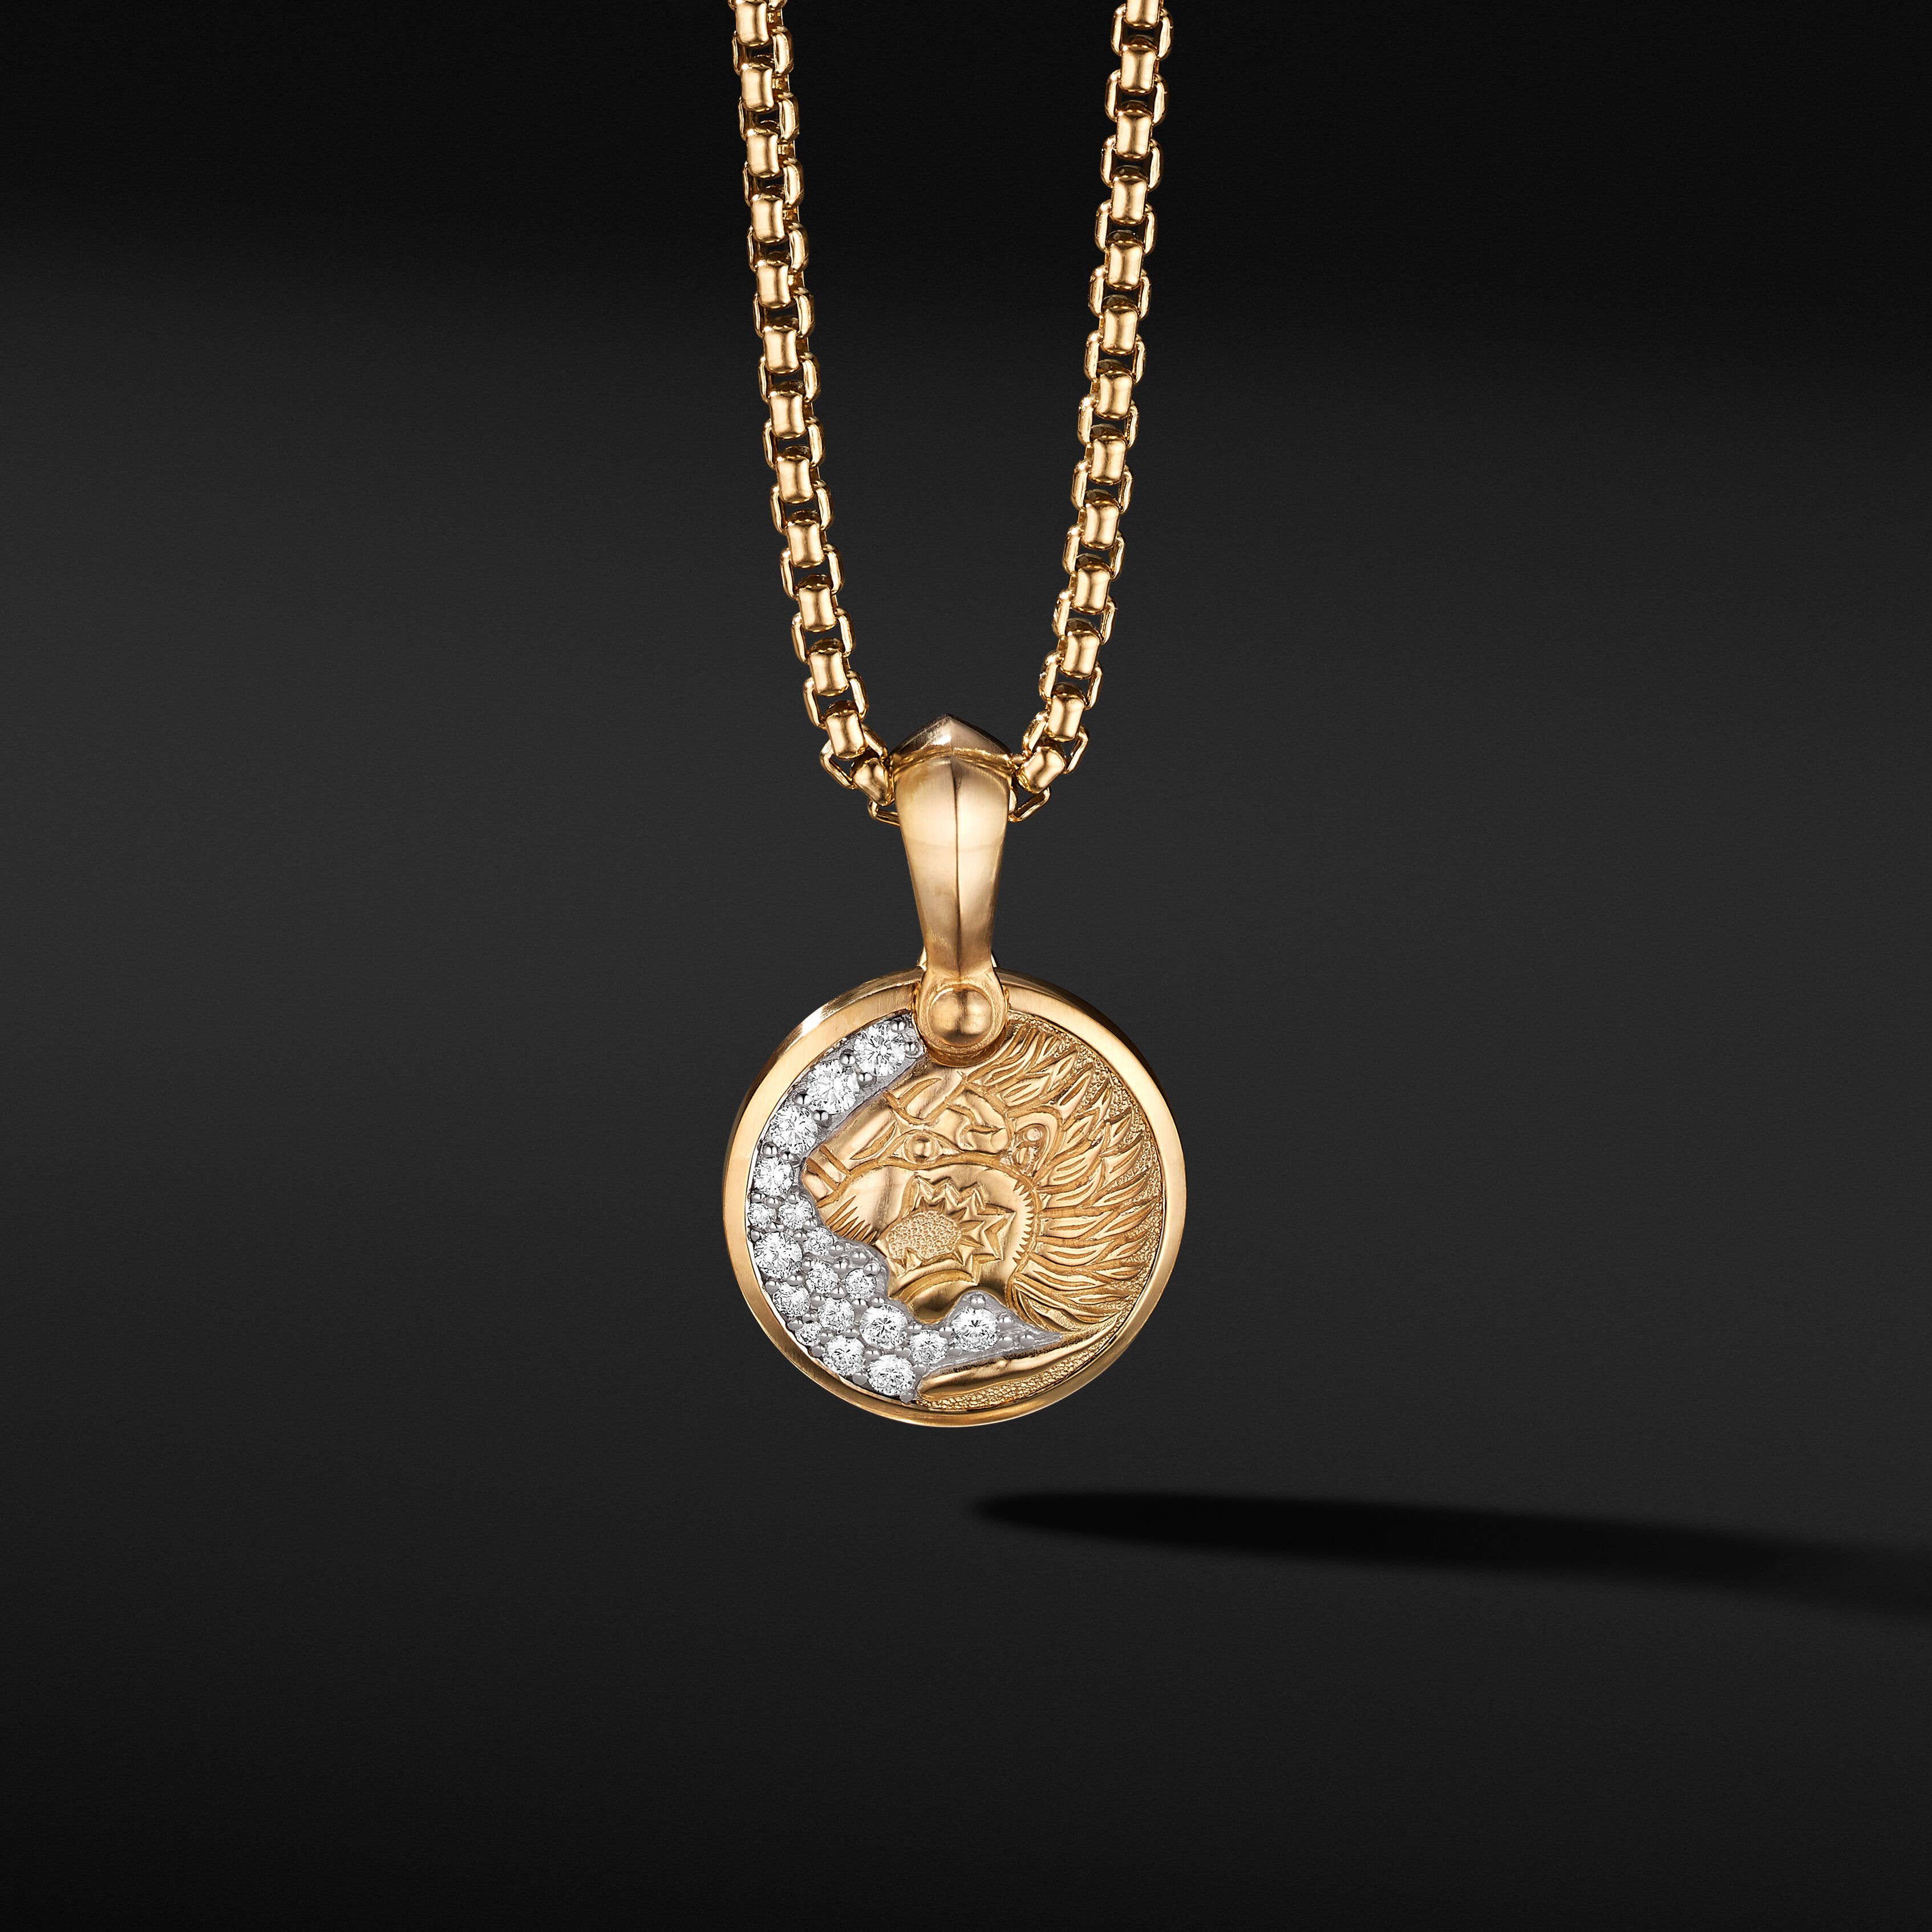 Petrvs® Lion Amulet in 18K Yellow Gold with Pavé Diamonds